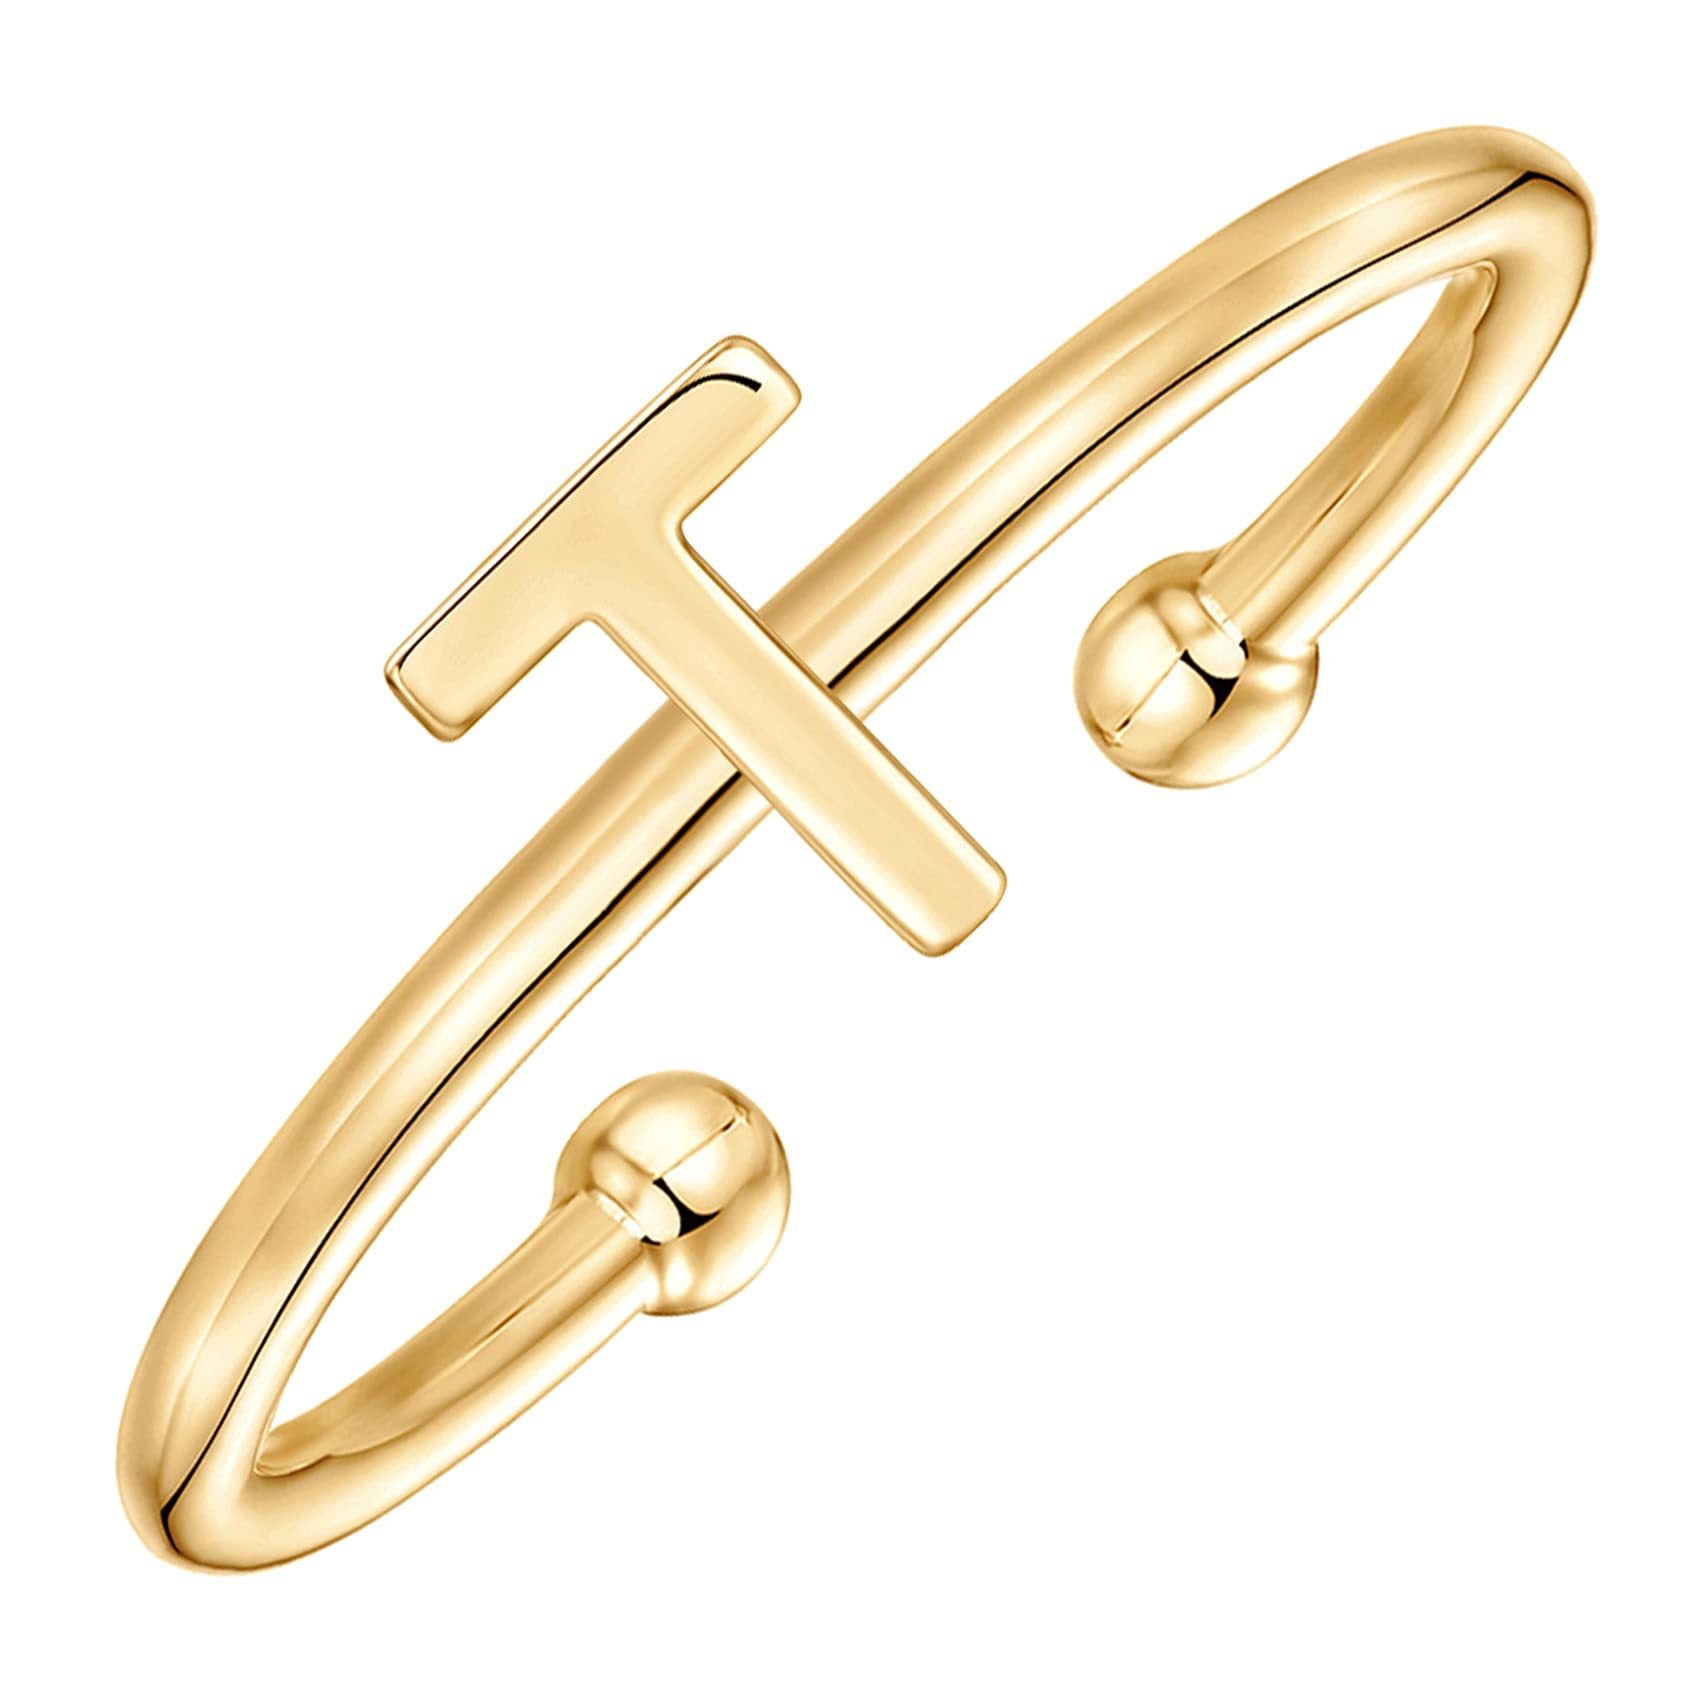 Fashion Style Cutout Letter Ring